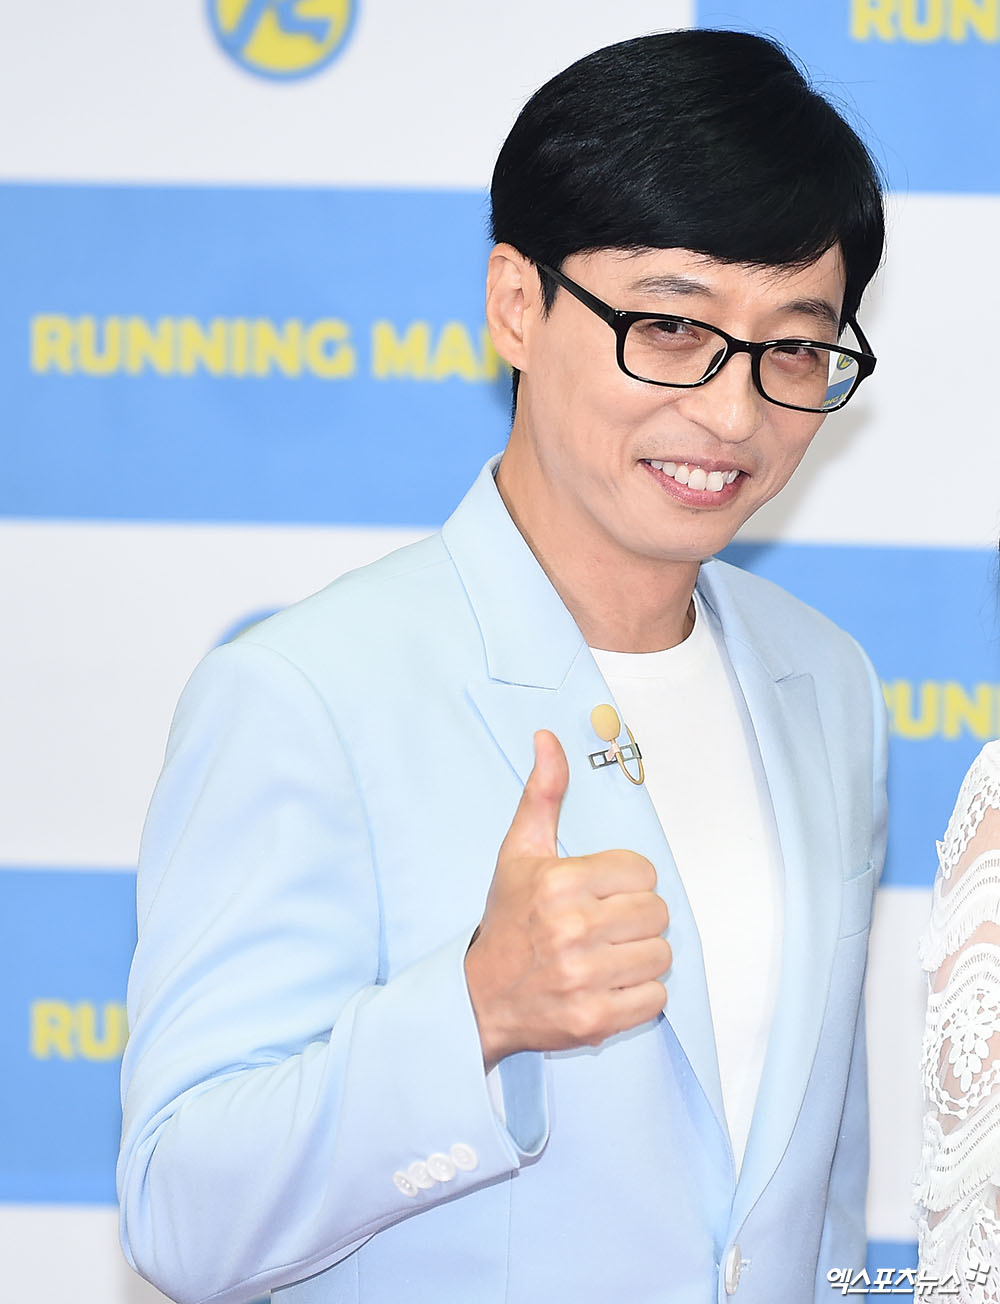 Yoo Jae-Suk, who attended the fan meeting Running District commemorating the 9th anniversary of SBS Running Man held at Ewha Womans University Auditorium in Daehyun-dong, Seoul on the afternoon of the 26th, has photo time.